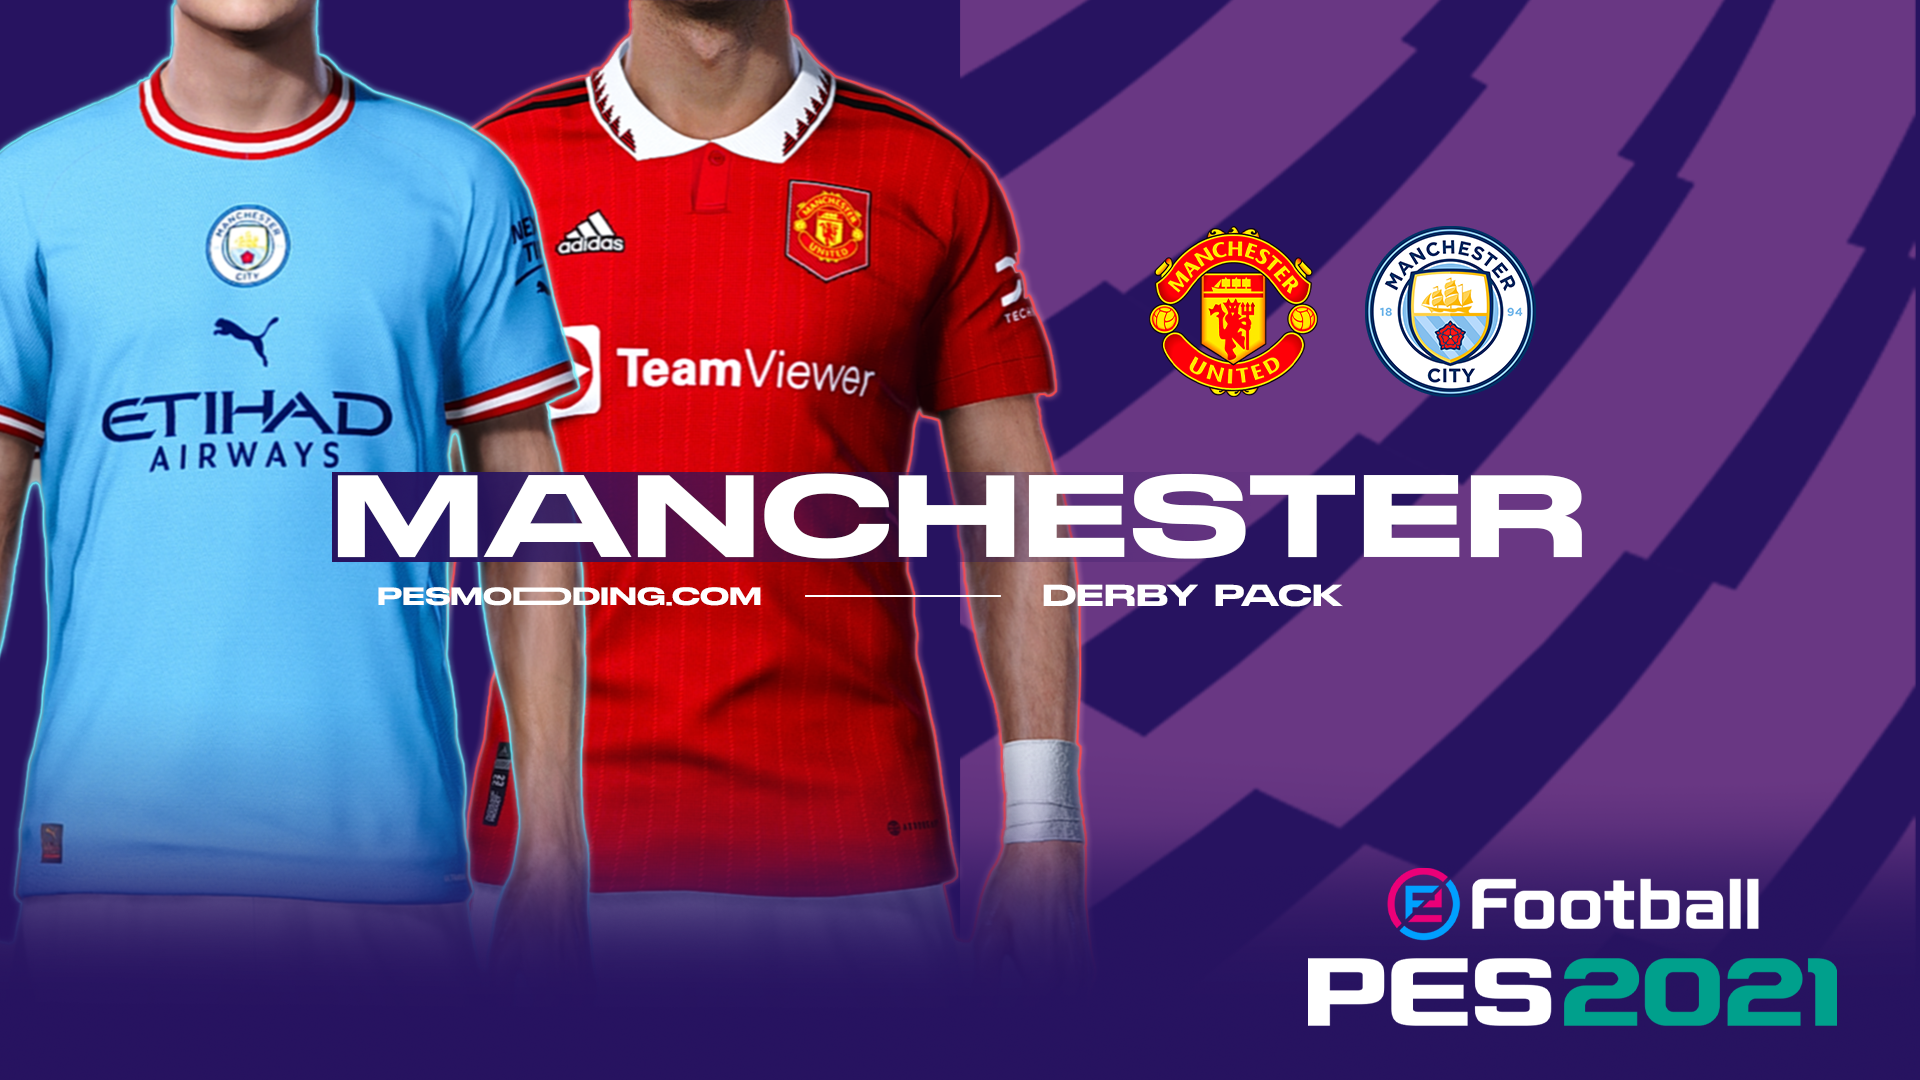 PES-FILES.RU on X: PES 2021 Manchester City FC 22/23 Kitpack Update by  Miguelanhel  Manchester City 2023 season renewal for  #PES2021 #eFootball2022 #PES2020 #PES2021 #eFootball #eFootbalPES2021  #PES2022 #PC #PS4 #PS5 #pesfiles